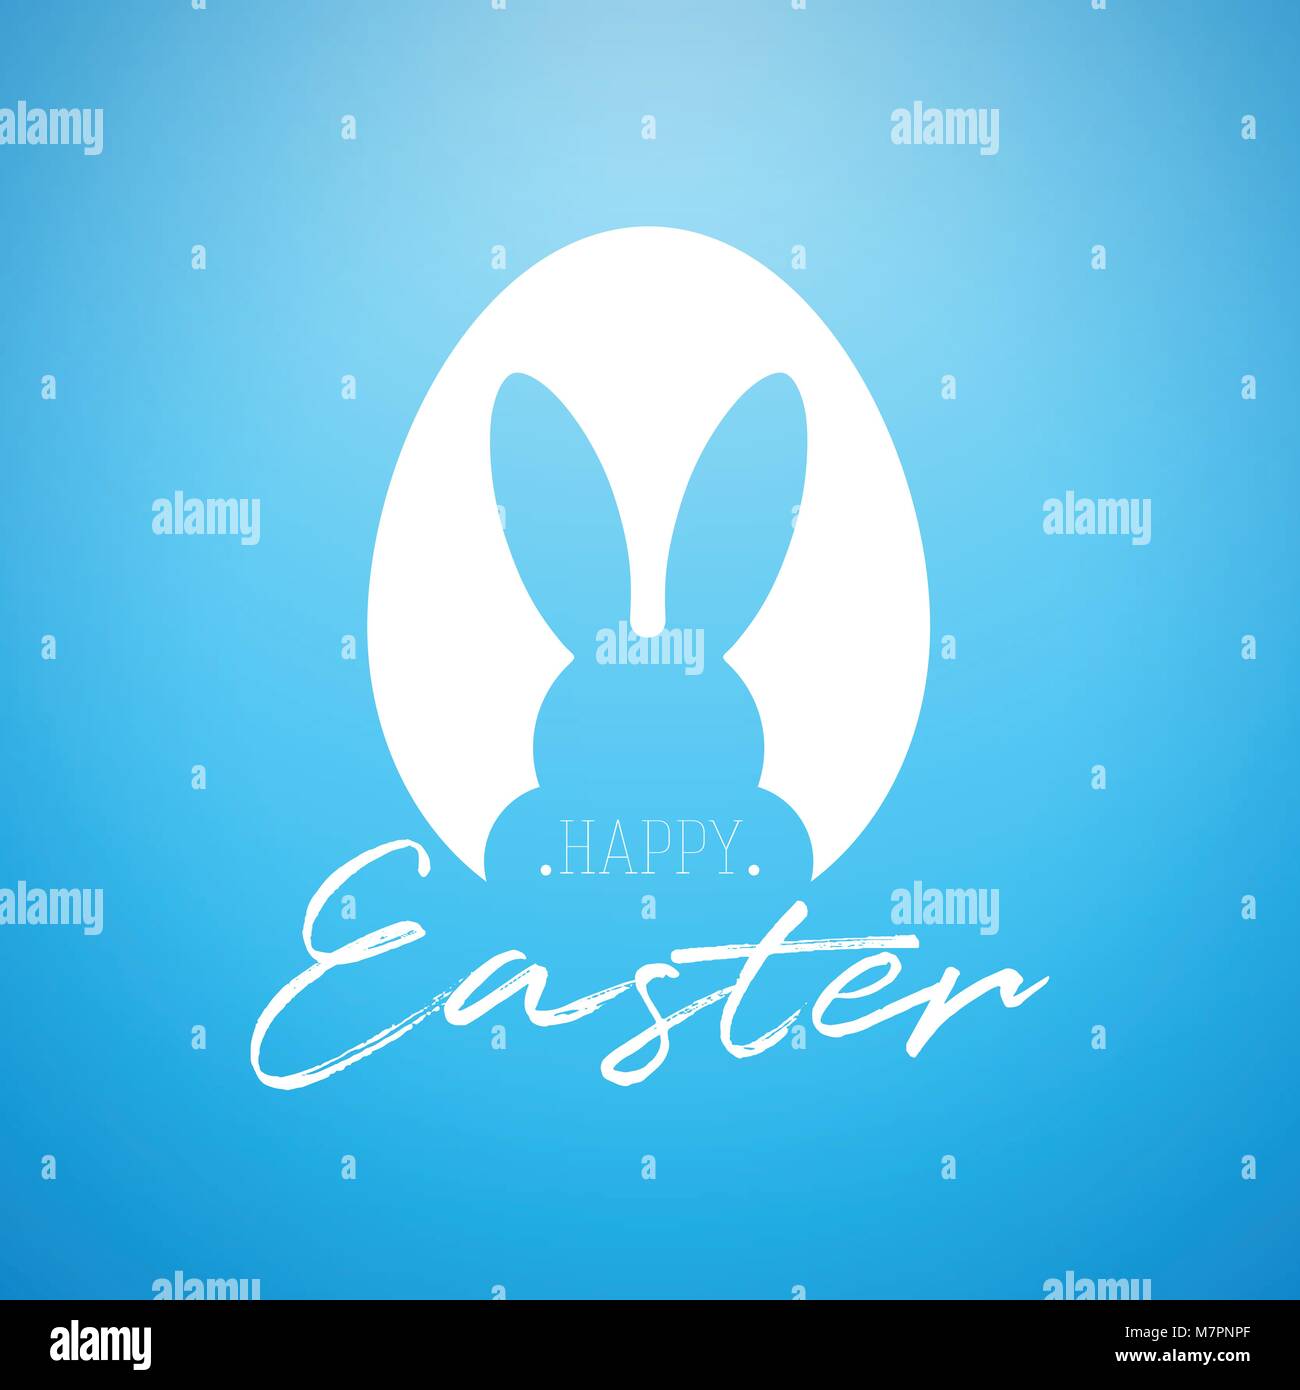 Vector Happy Easter Holiday Illustration with Rabbit Ears in Cutting Egg and HandwritingTypography Letter on Blue Background. International Celebration Design for Greeting Card, Party Invitation or Promo Banner. Stock Vector